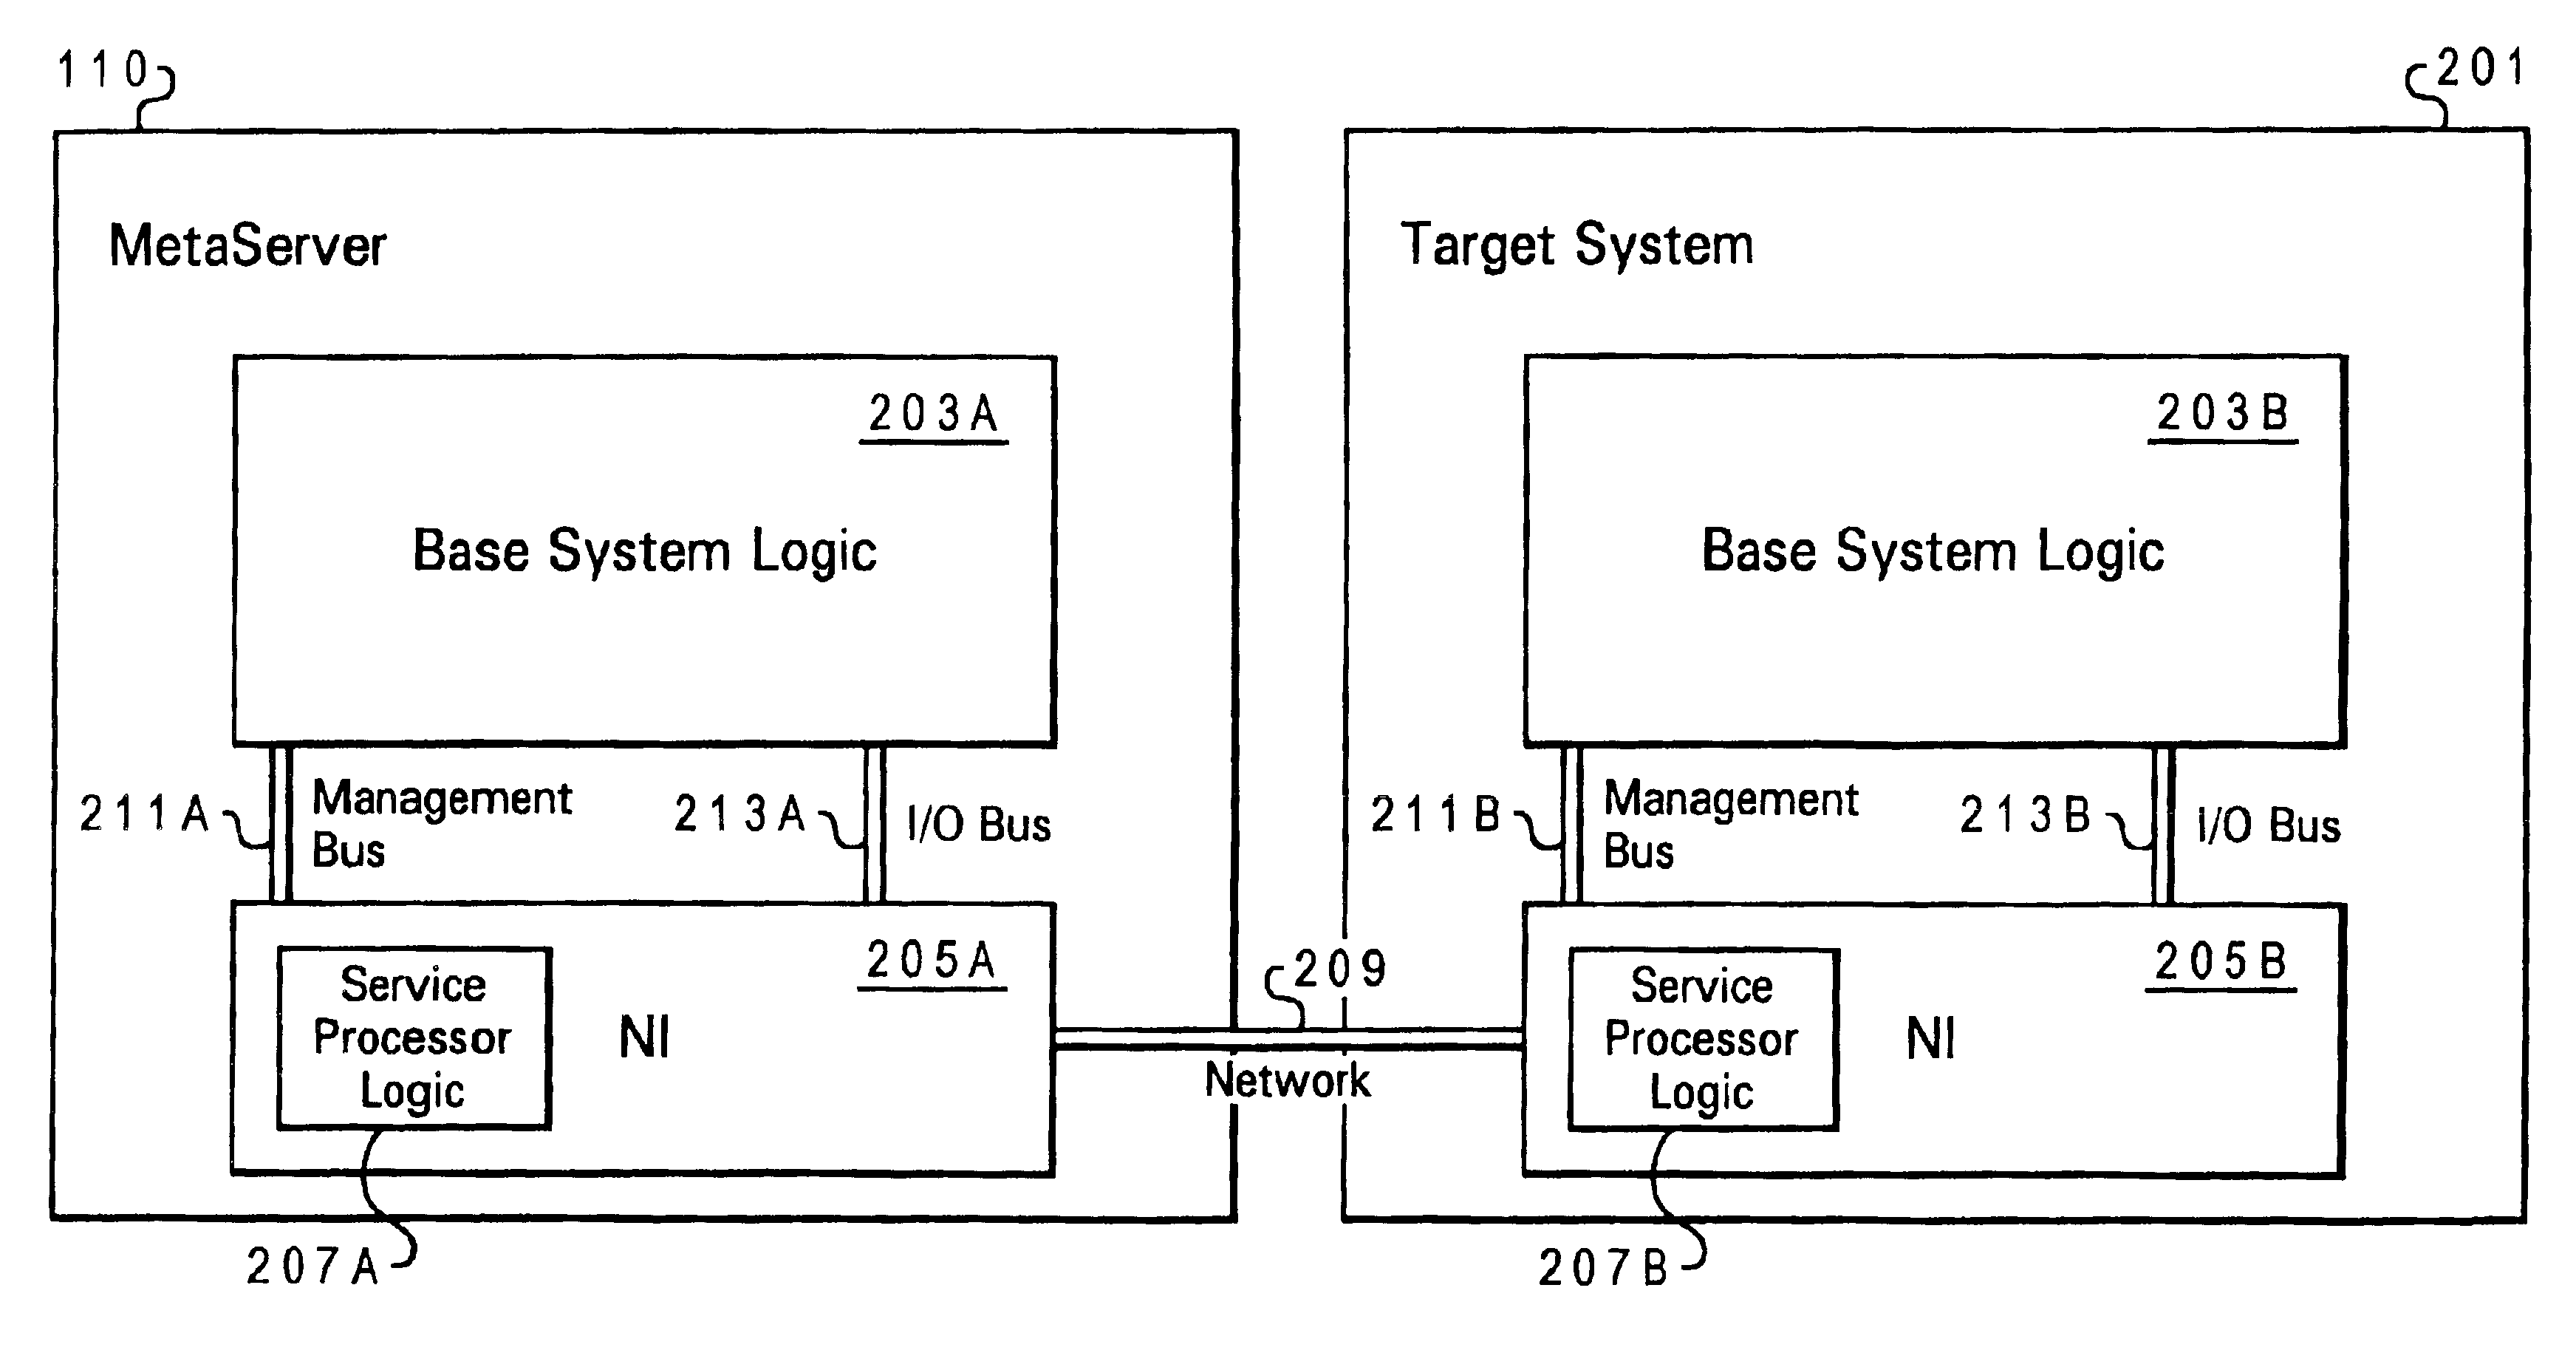 Programming network interface cards to perform system and network management functions